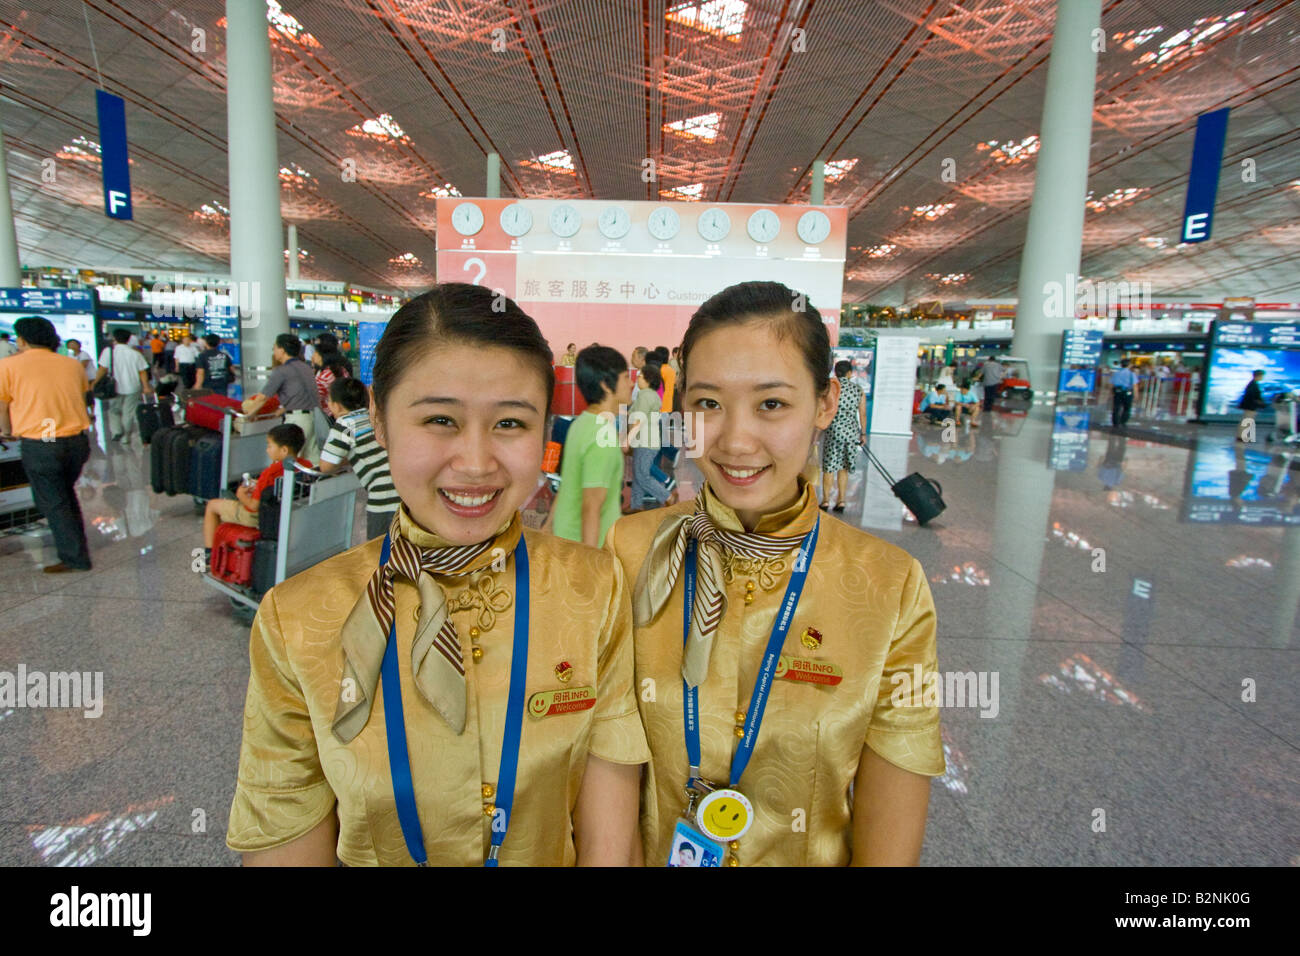 Two Young Airport Information Booth Employees at Beijing International Airport Stock Photo